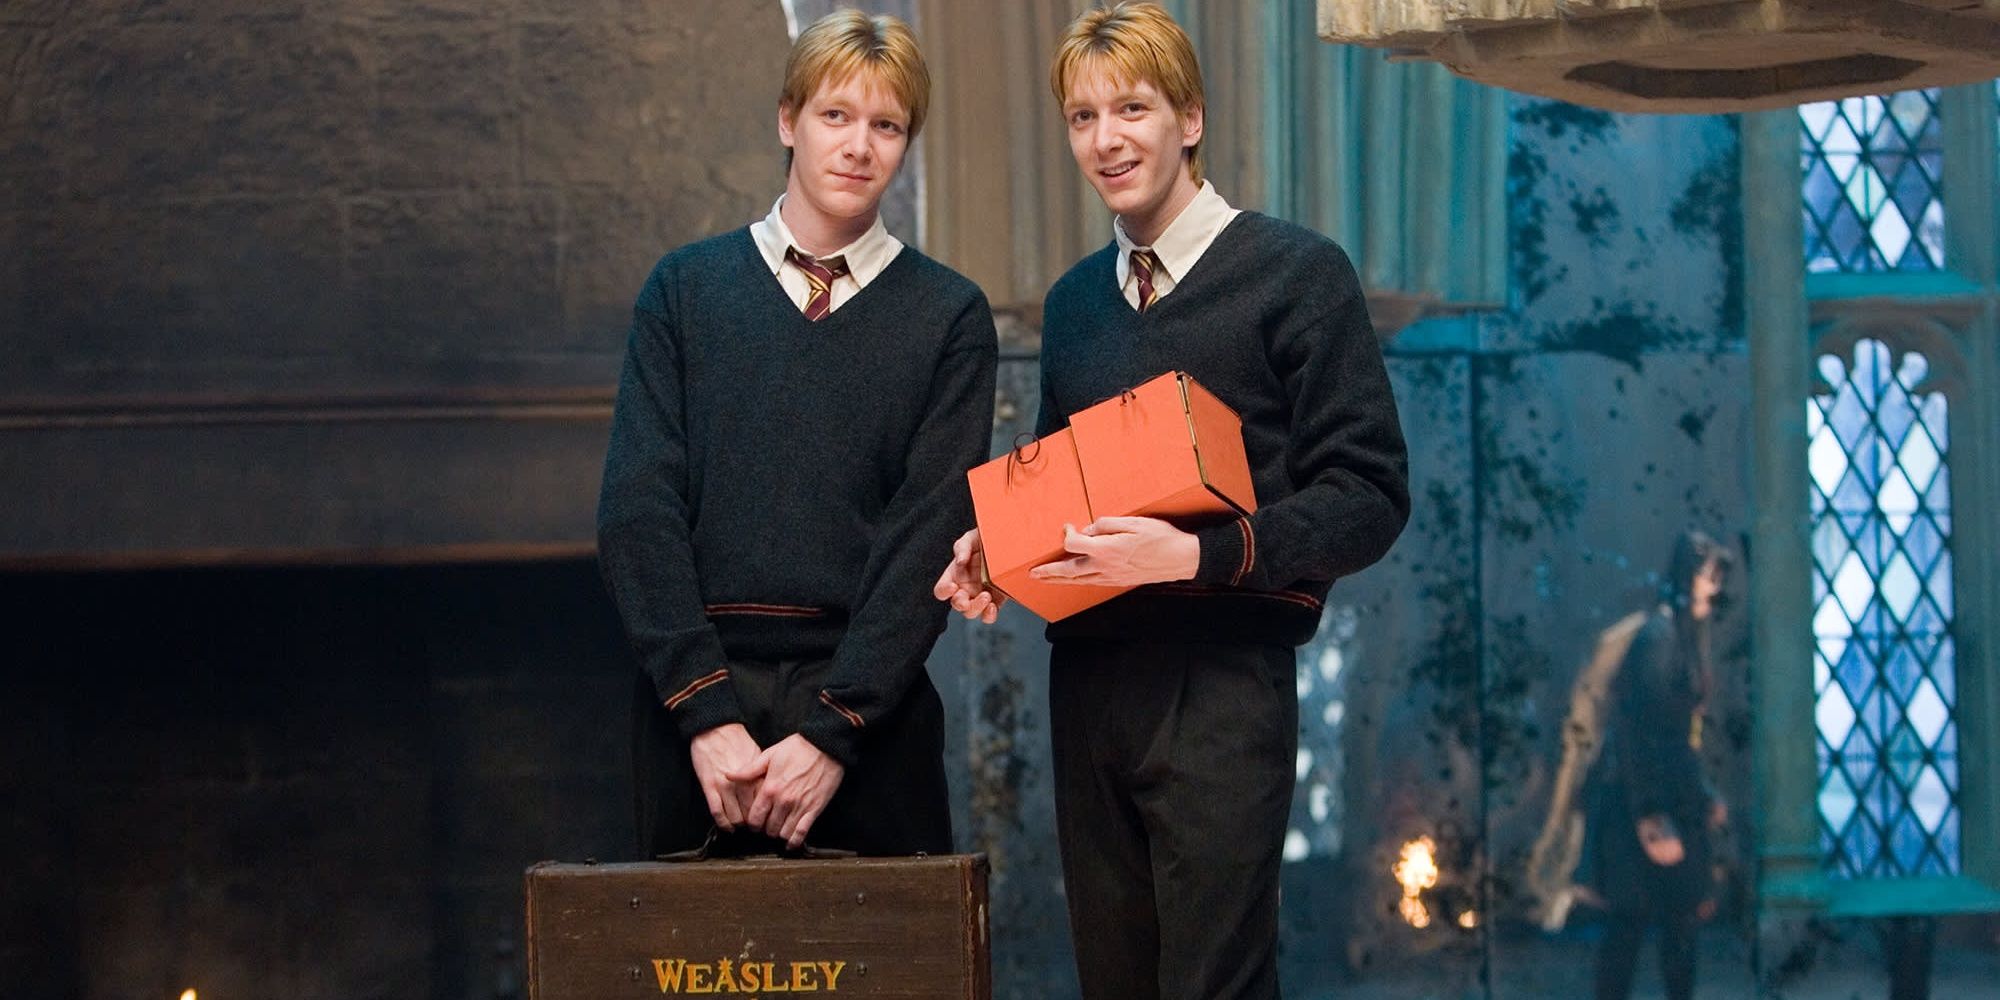 fred and george weasley smiling in harry potter while holding a weasley case